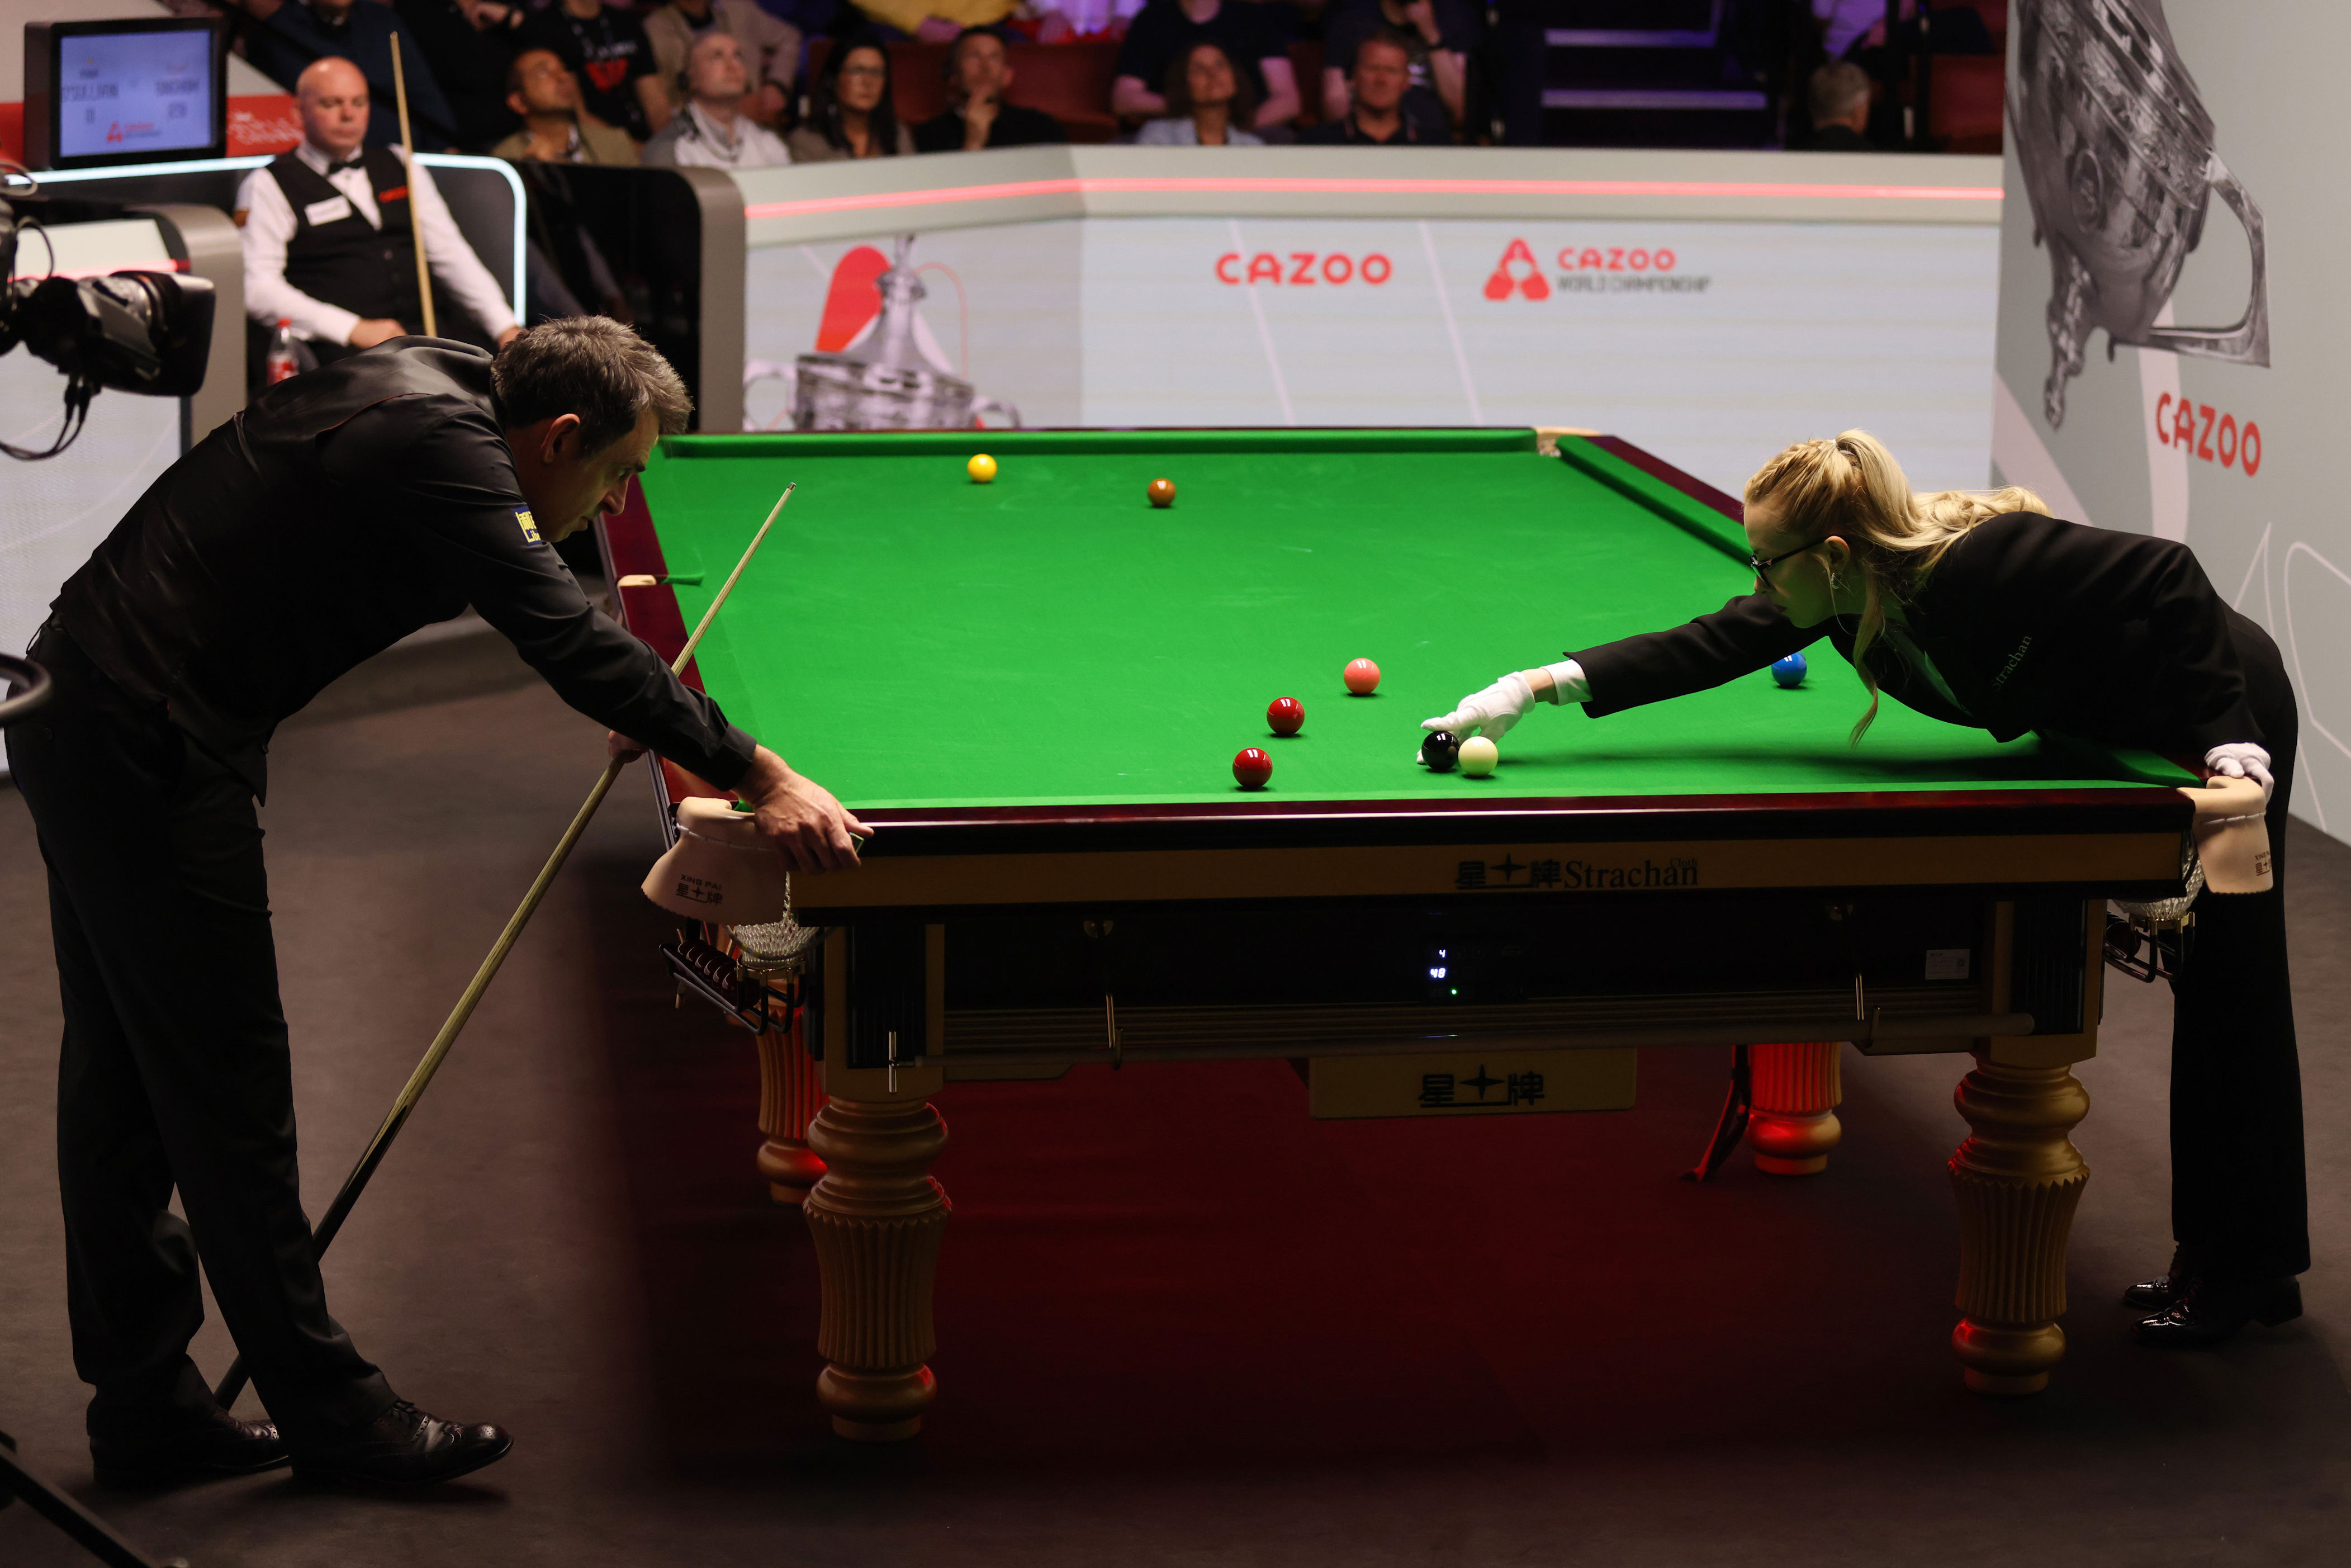 ronnie o’sullivan shows ‘unbelievable’ sportsmanship in incident at world snooker championship